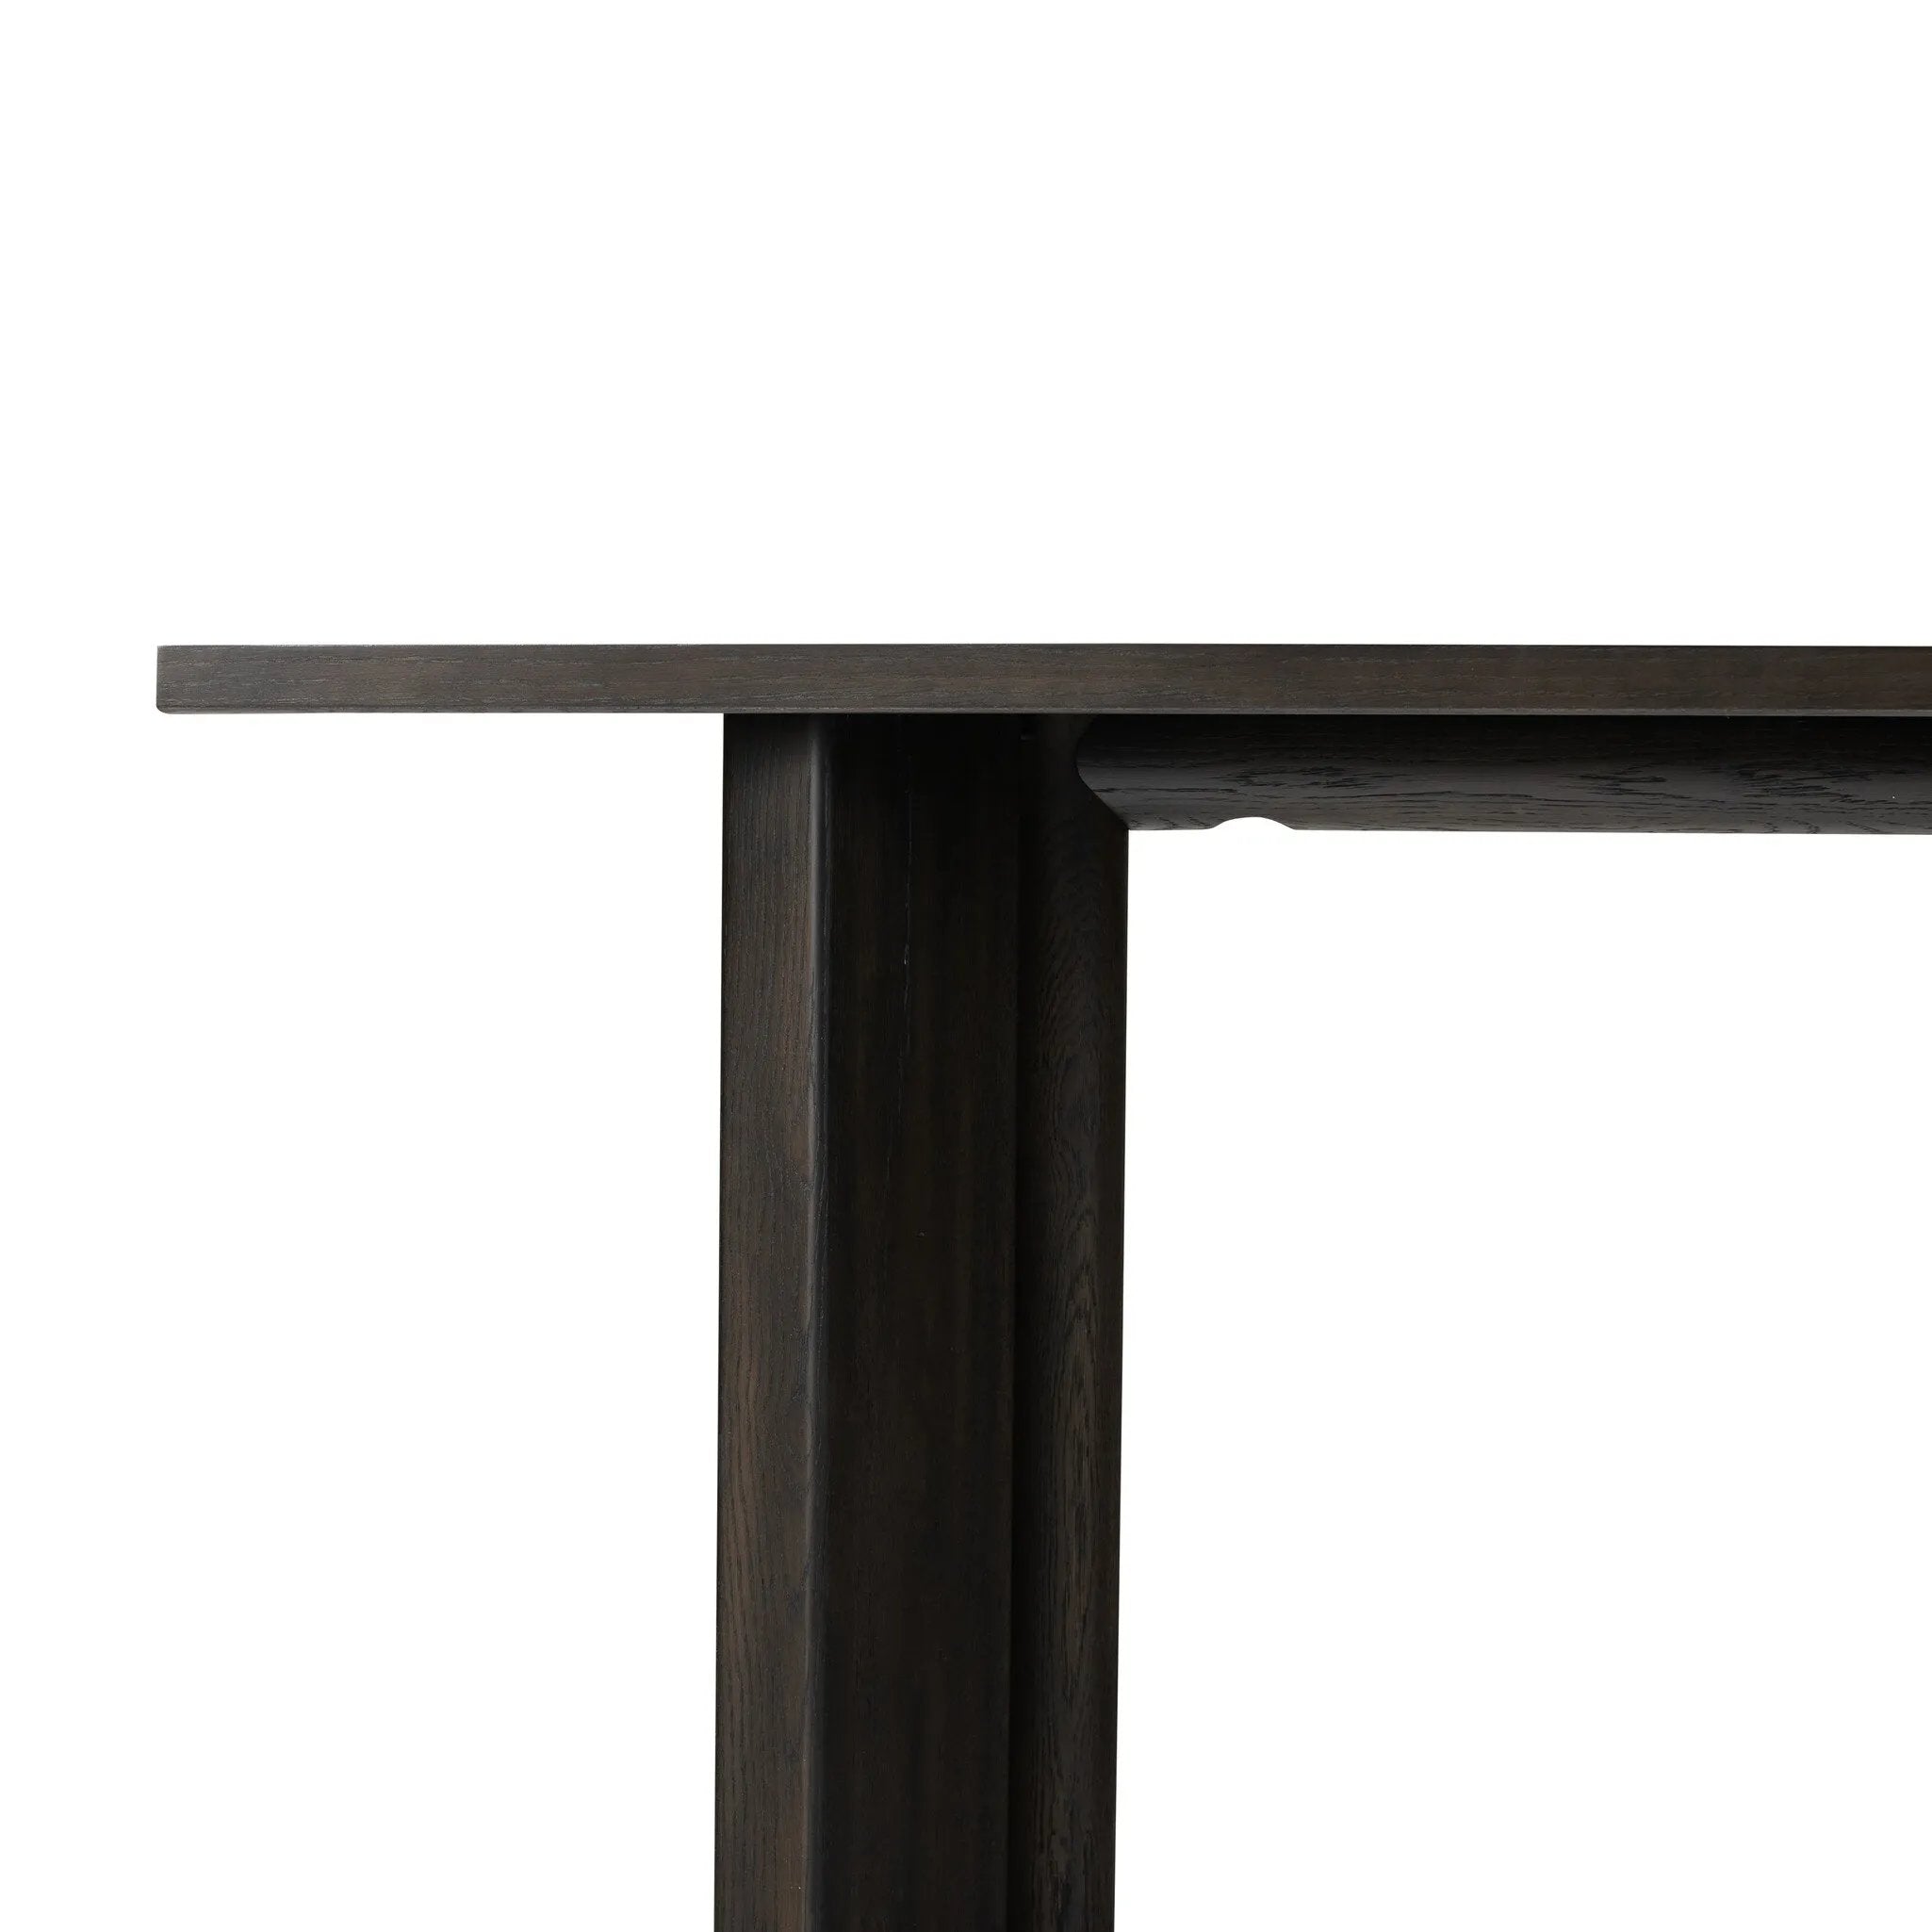 A smoked black finish delivers a character-rich look to an open-style console table. Angled panel legs up the intrigue factor.Collection: Haide Amethyst Home provides interior design, new home construction design consulting, vintage area rugs, and lighting in the Miami metro area.